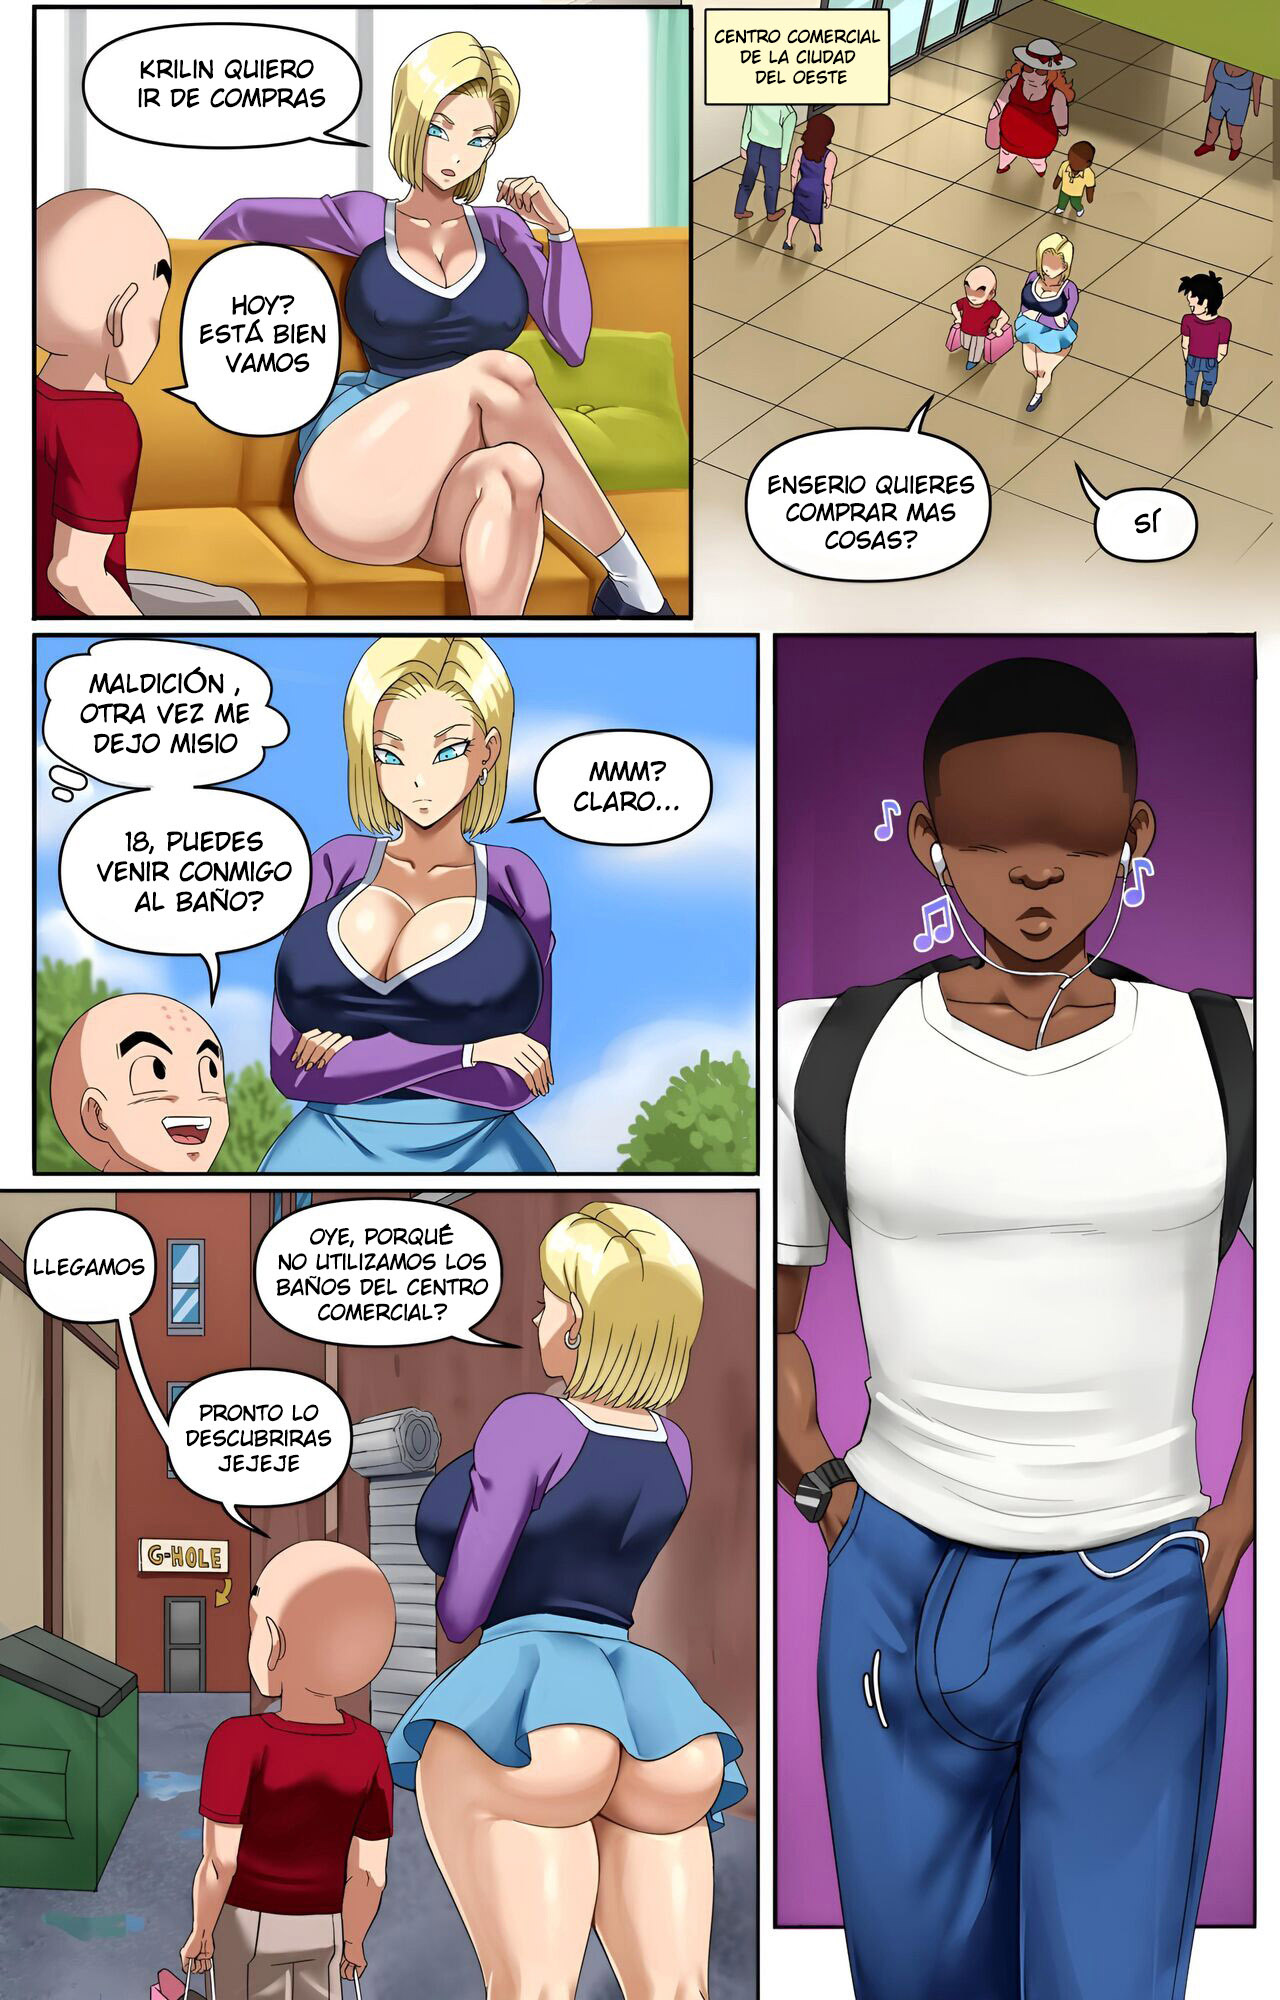 ANDROID 18 NTR parte 4